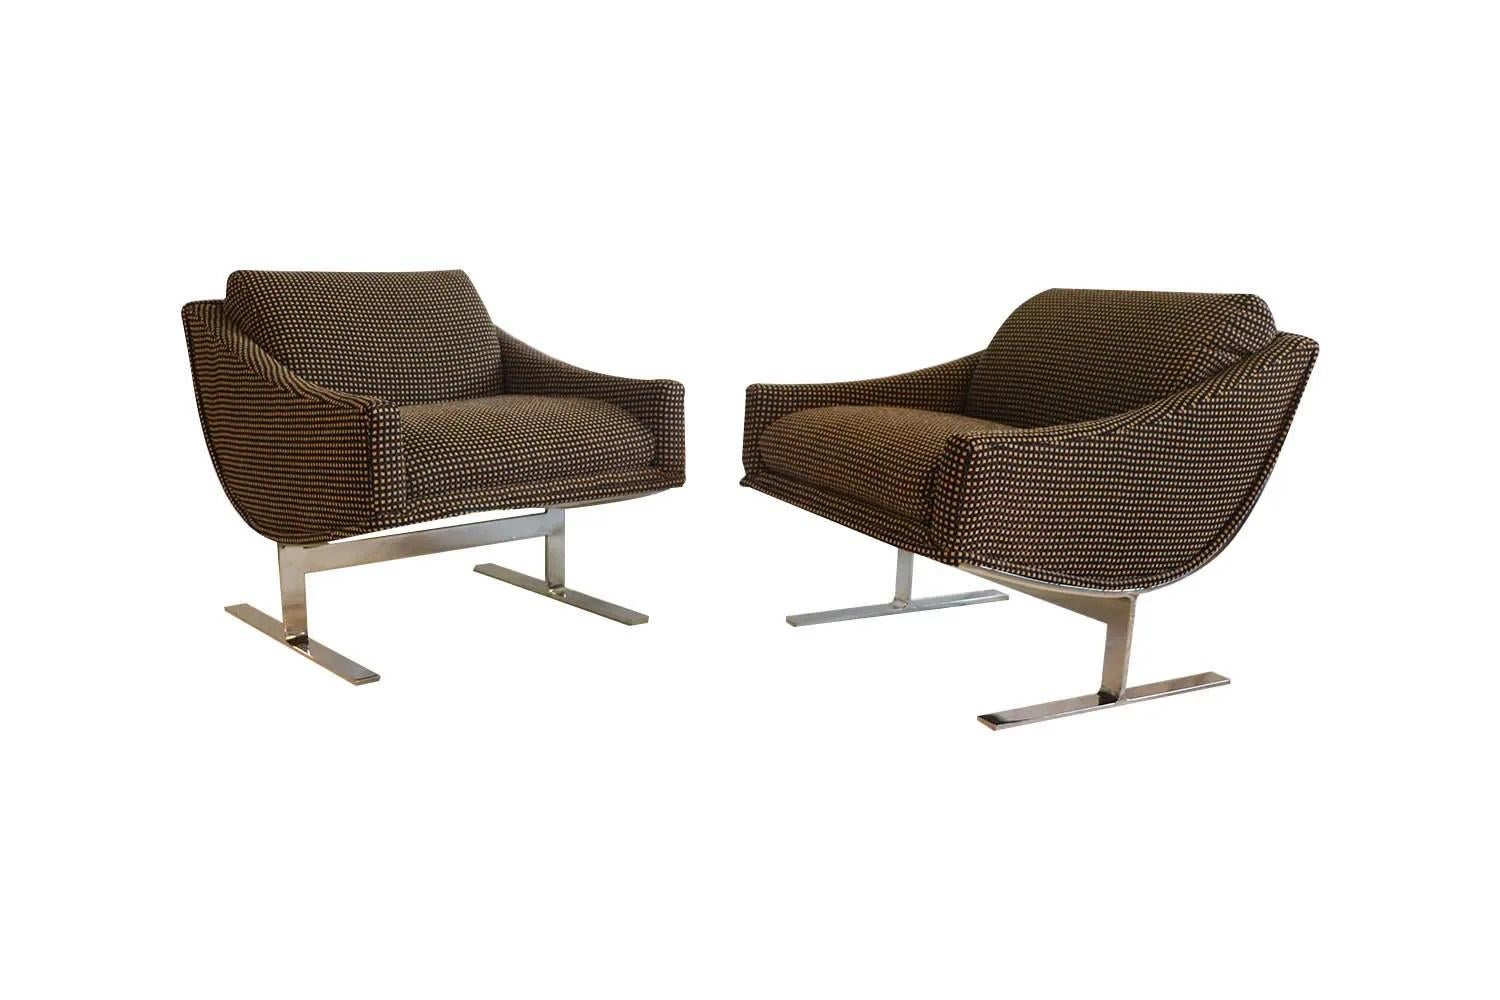 A stunning pair of mid-century modern 1960s “Arc” lounge chairs designed by Kipp Stewart for Directional furniture. An exceptional pair, both for their form and quality. The pair embodies the whimsical fervor of the period, from 1960s. Featuring a